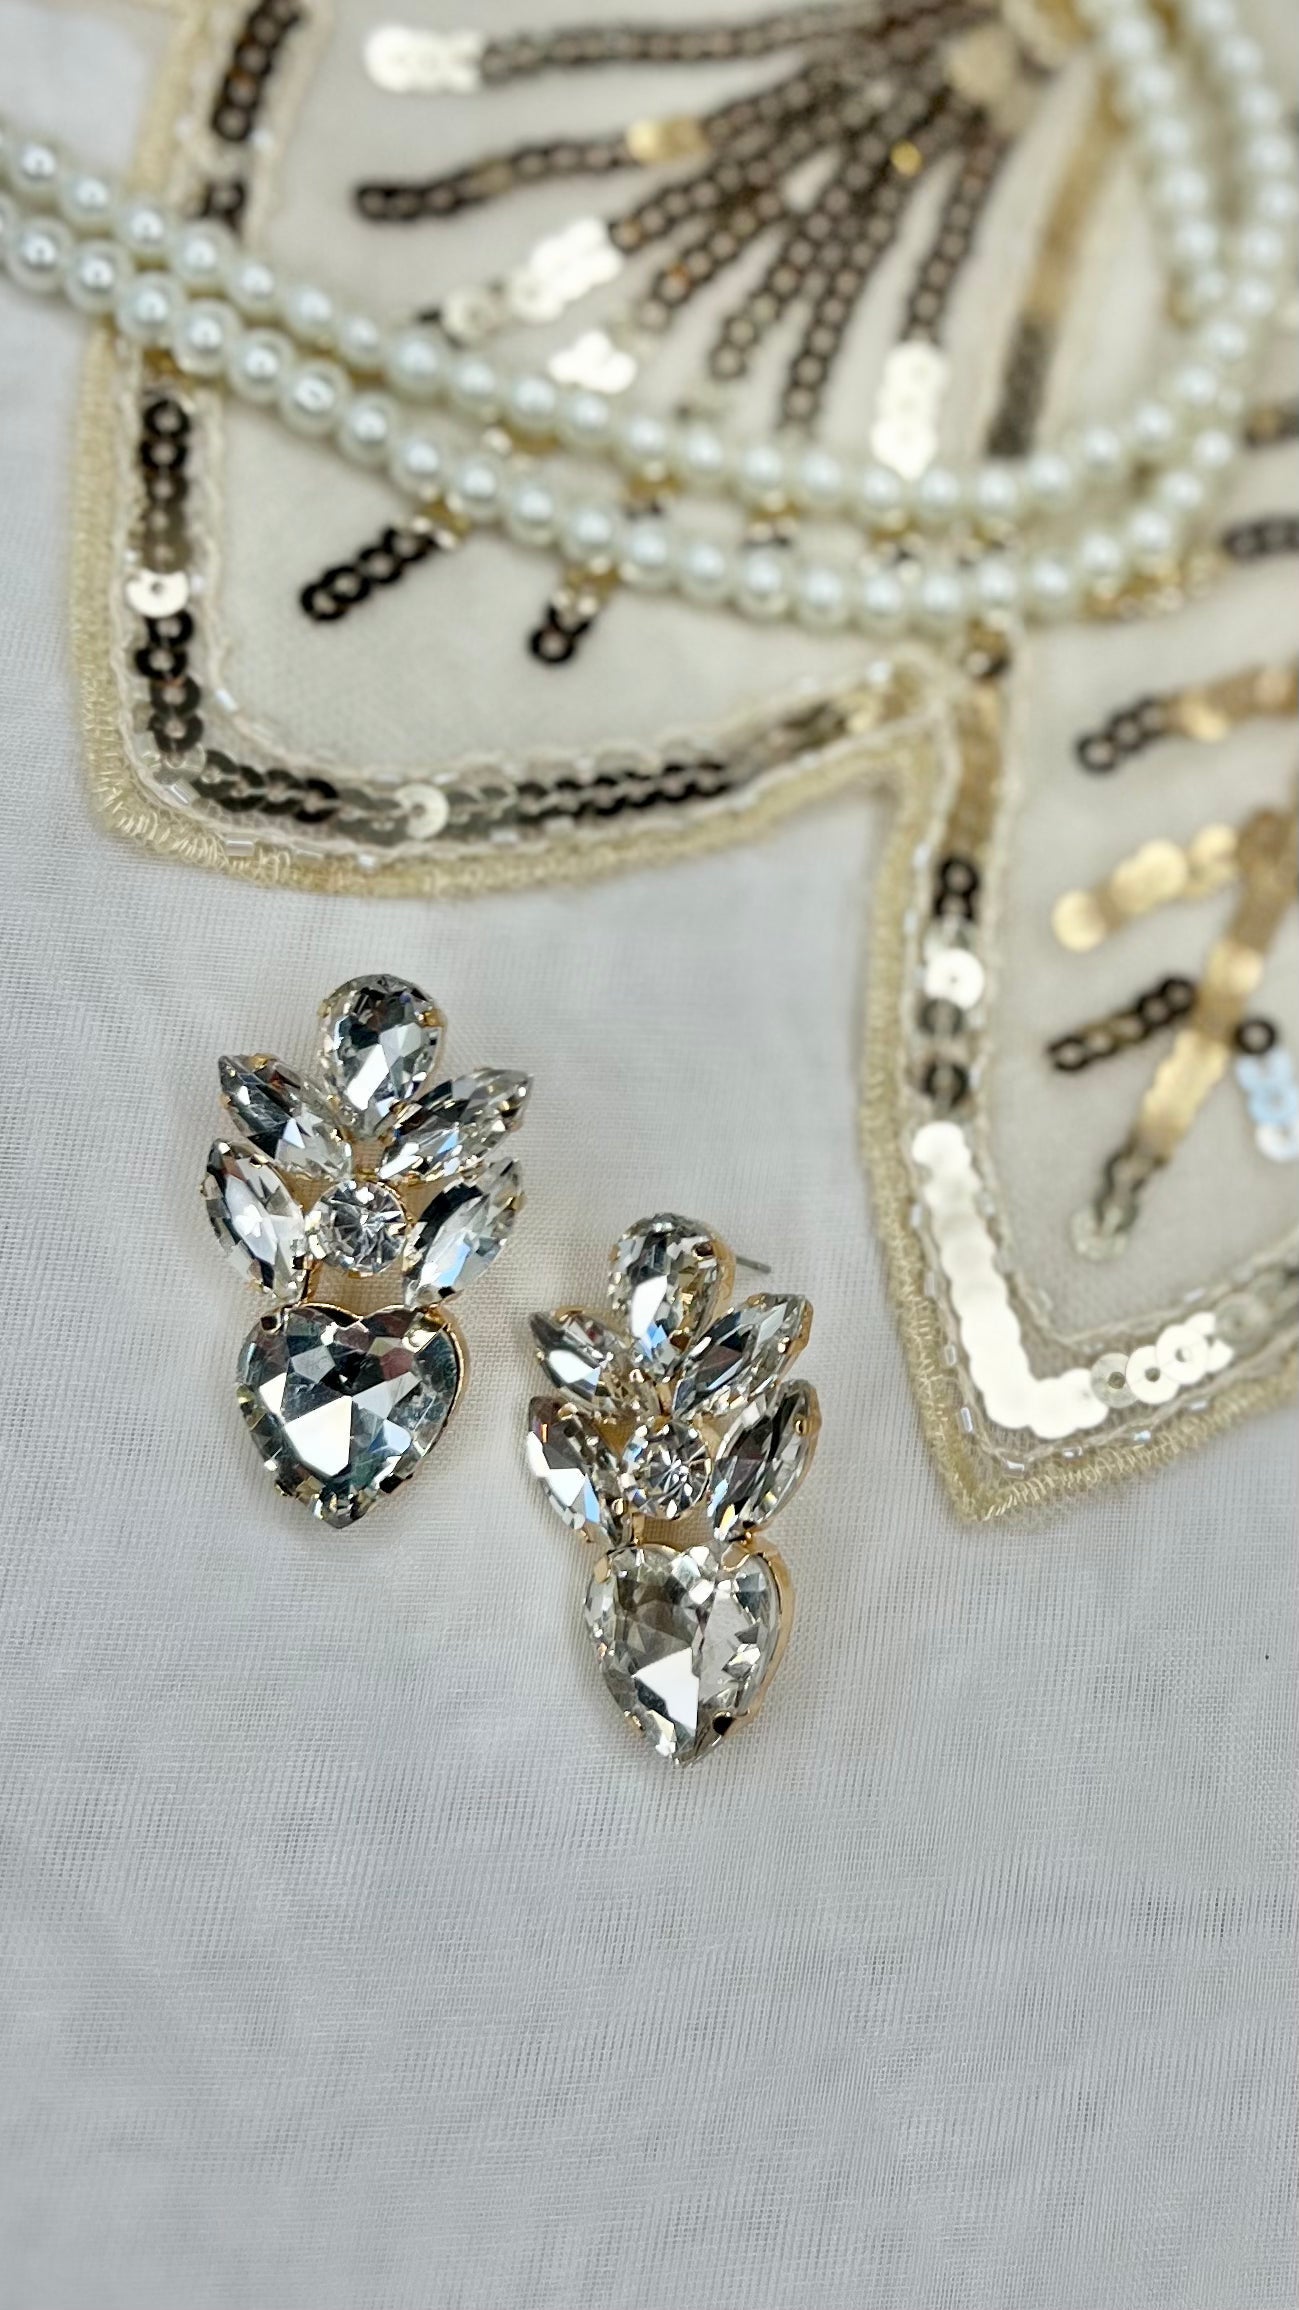 Gatsby Earrings - Heart Drops: Shop our stunning range of Gatsby inspired dangle earrings. Each pair is decorated with rhinestones ready to help you sparkle the night away
Material: alloy
Length:  - Ciao Bella Dresses 